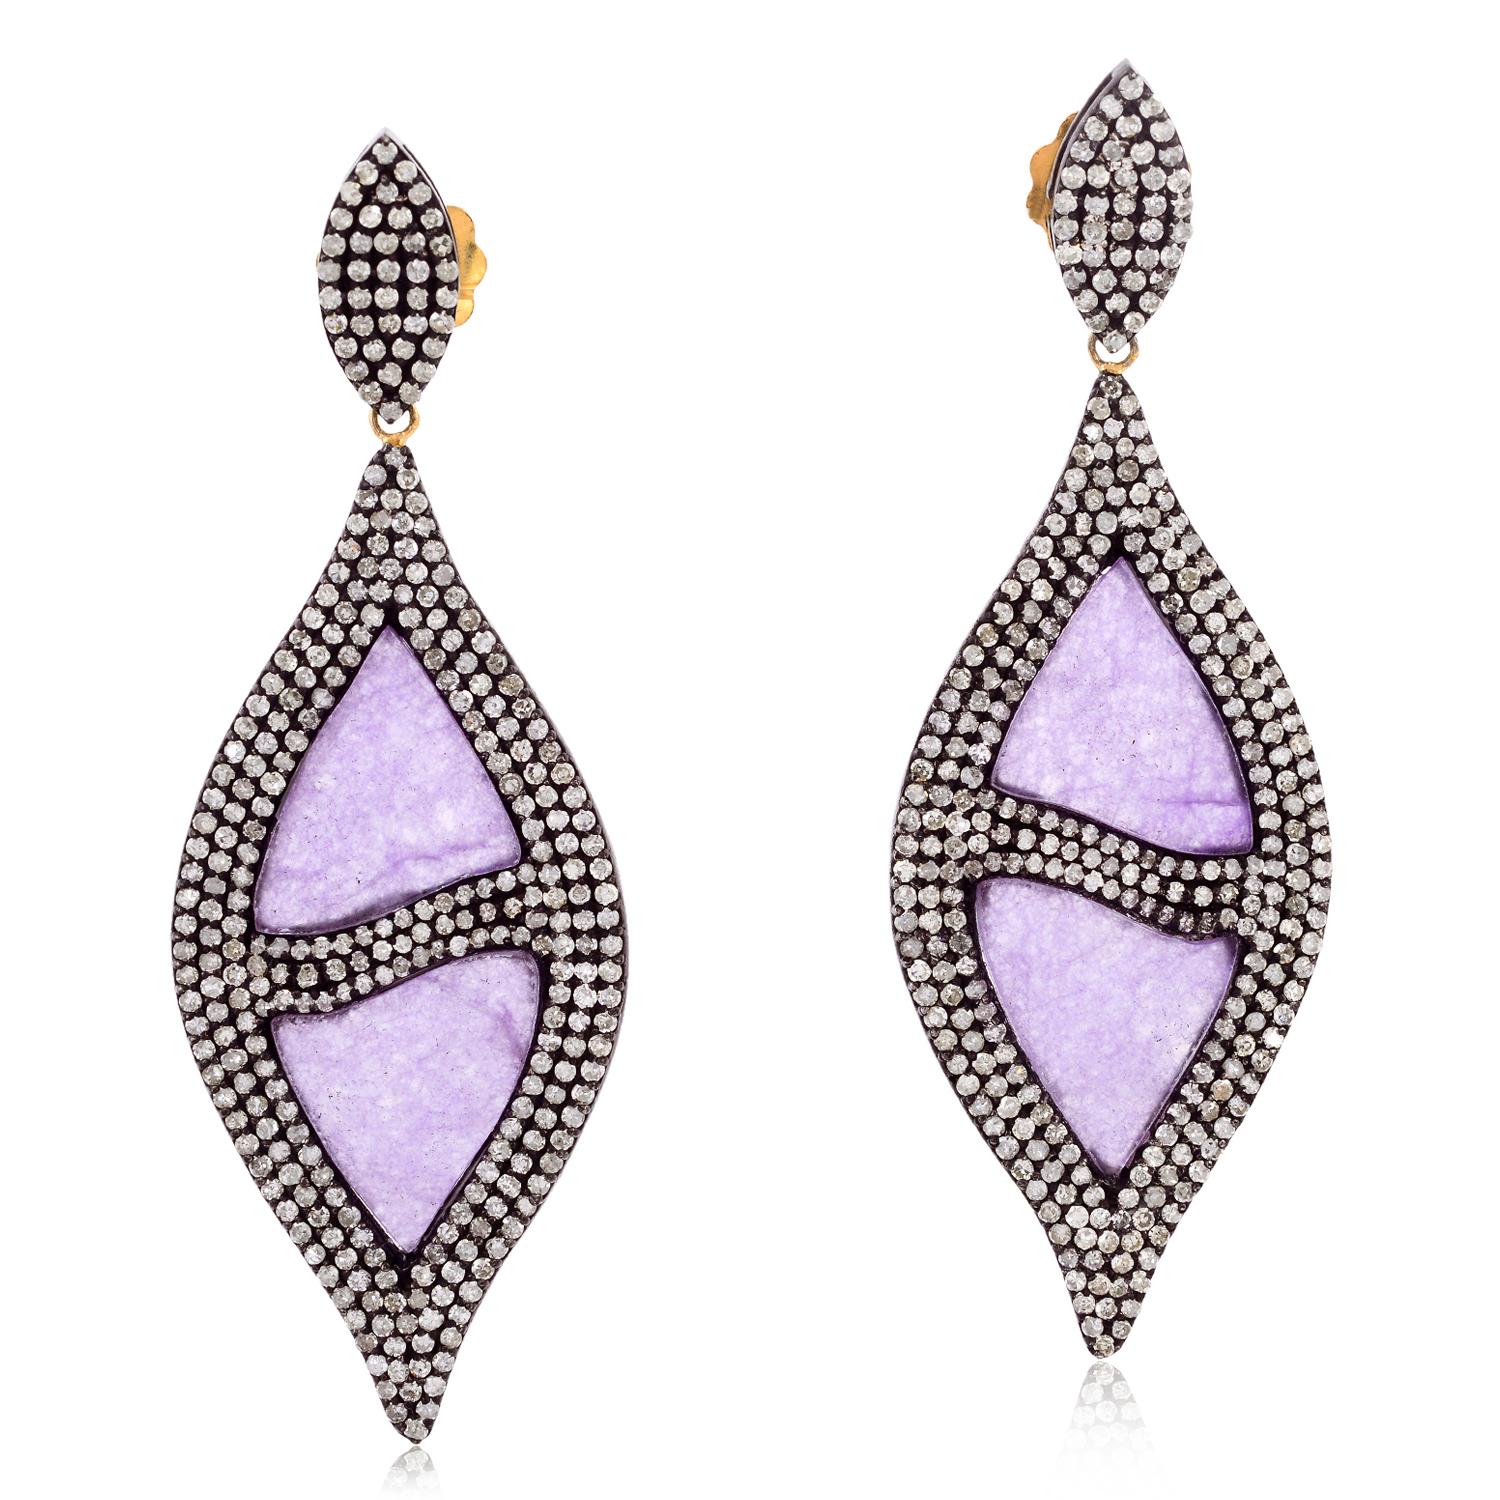 Mixed Cut Marquise Shaped Jade Earrings with Pave Diamonds Made in 18k Gold & Silver For Sale